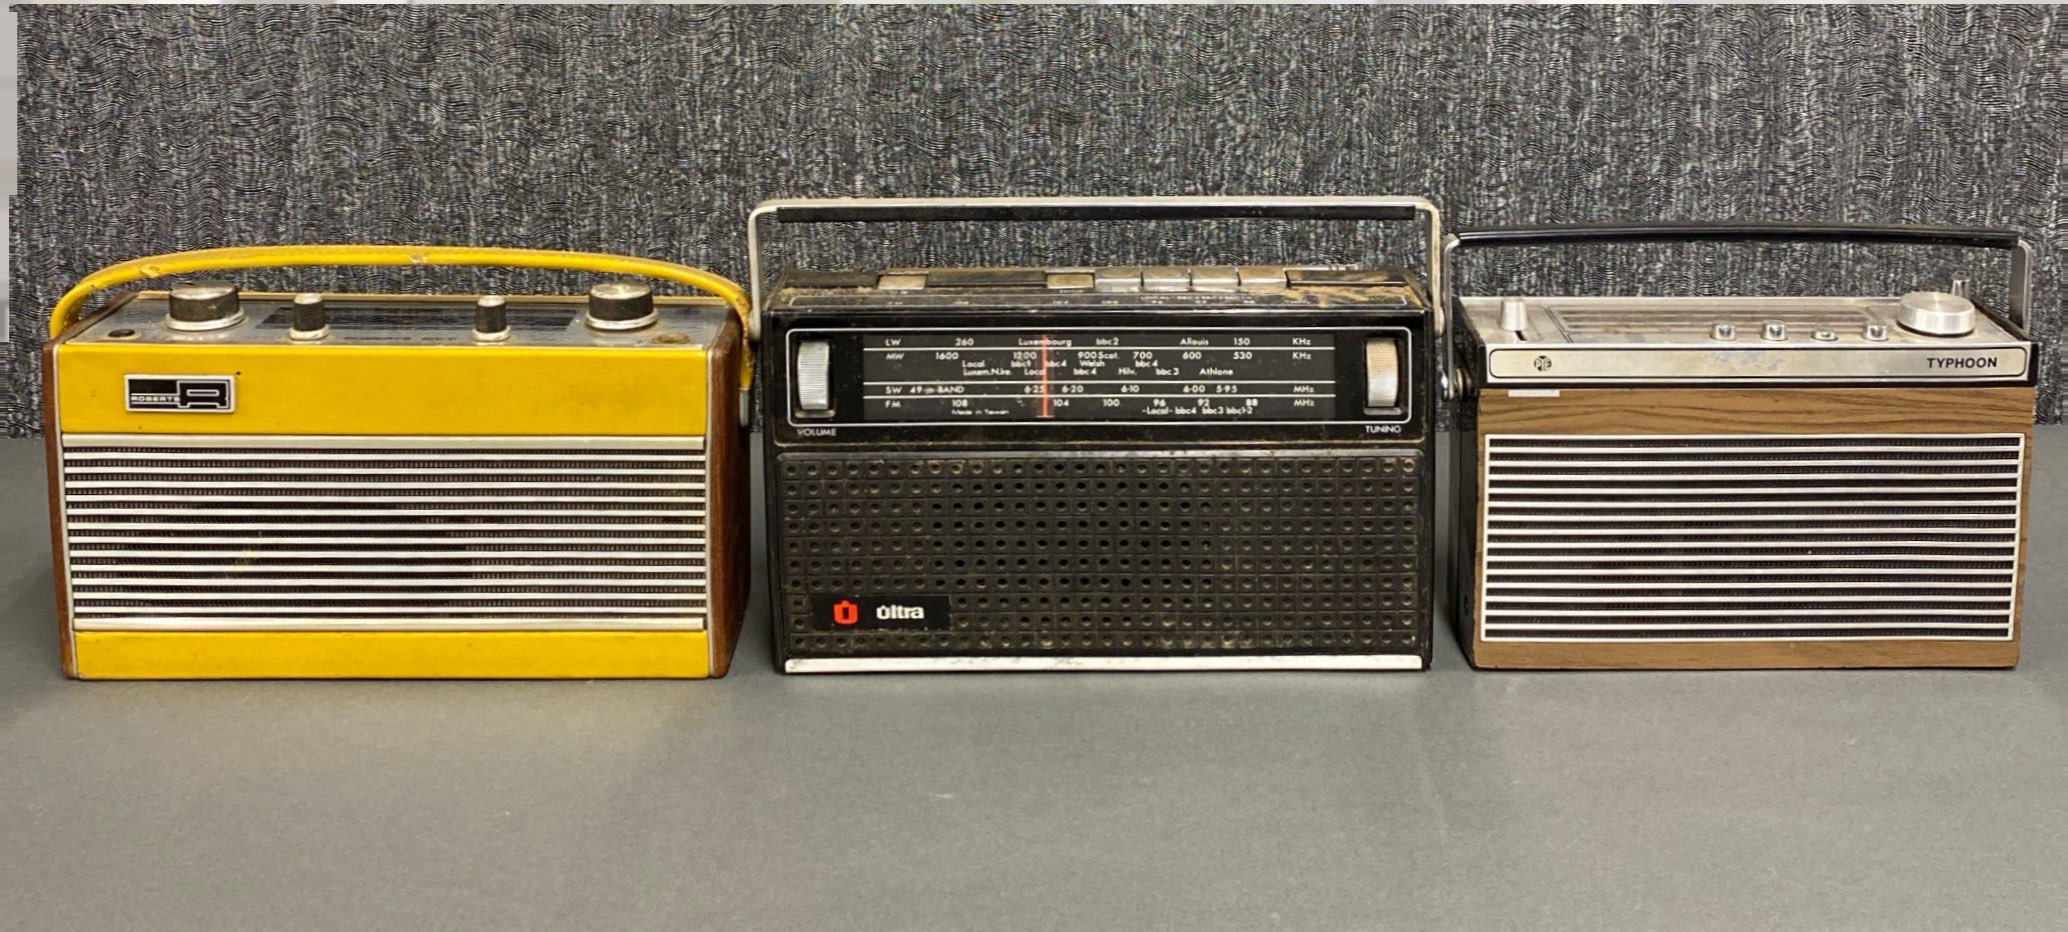 A group of three early solid state transistor radios, including a Pye Typhoon, a Roberts RIC2 and